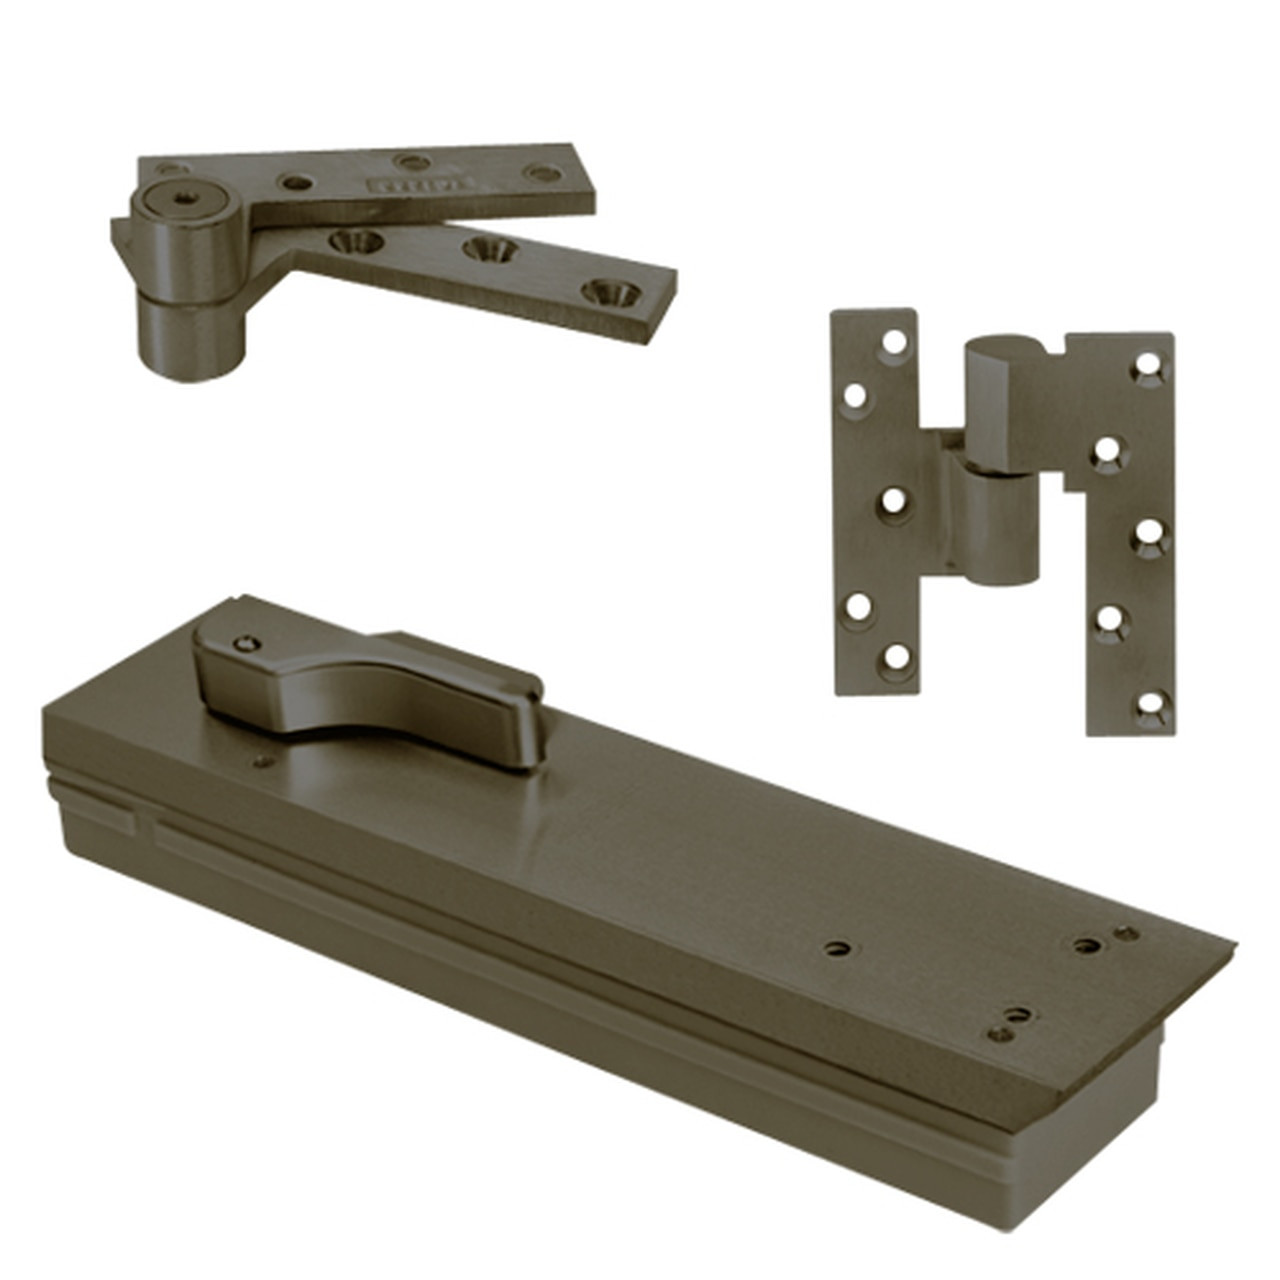 FQ5103NBC-LFP-LH-613 Rixson Q51 Series Fire Rated 3/4" Offset Hung Shallow Depth Floor Closers in Dark Bronze Finish